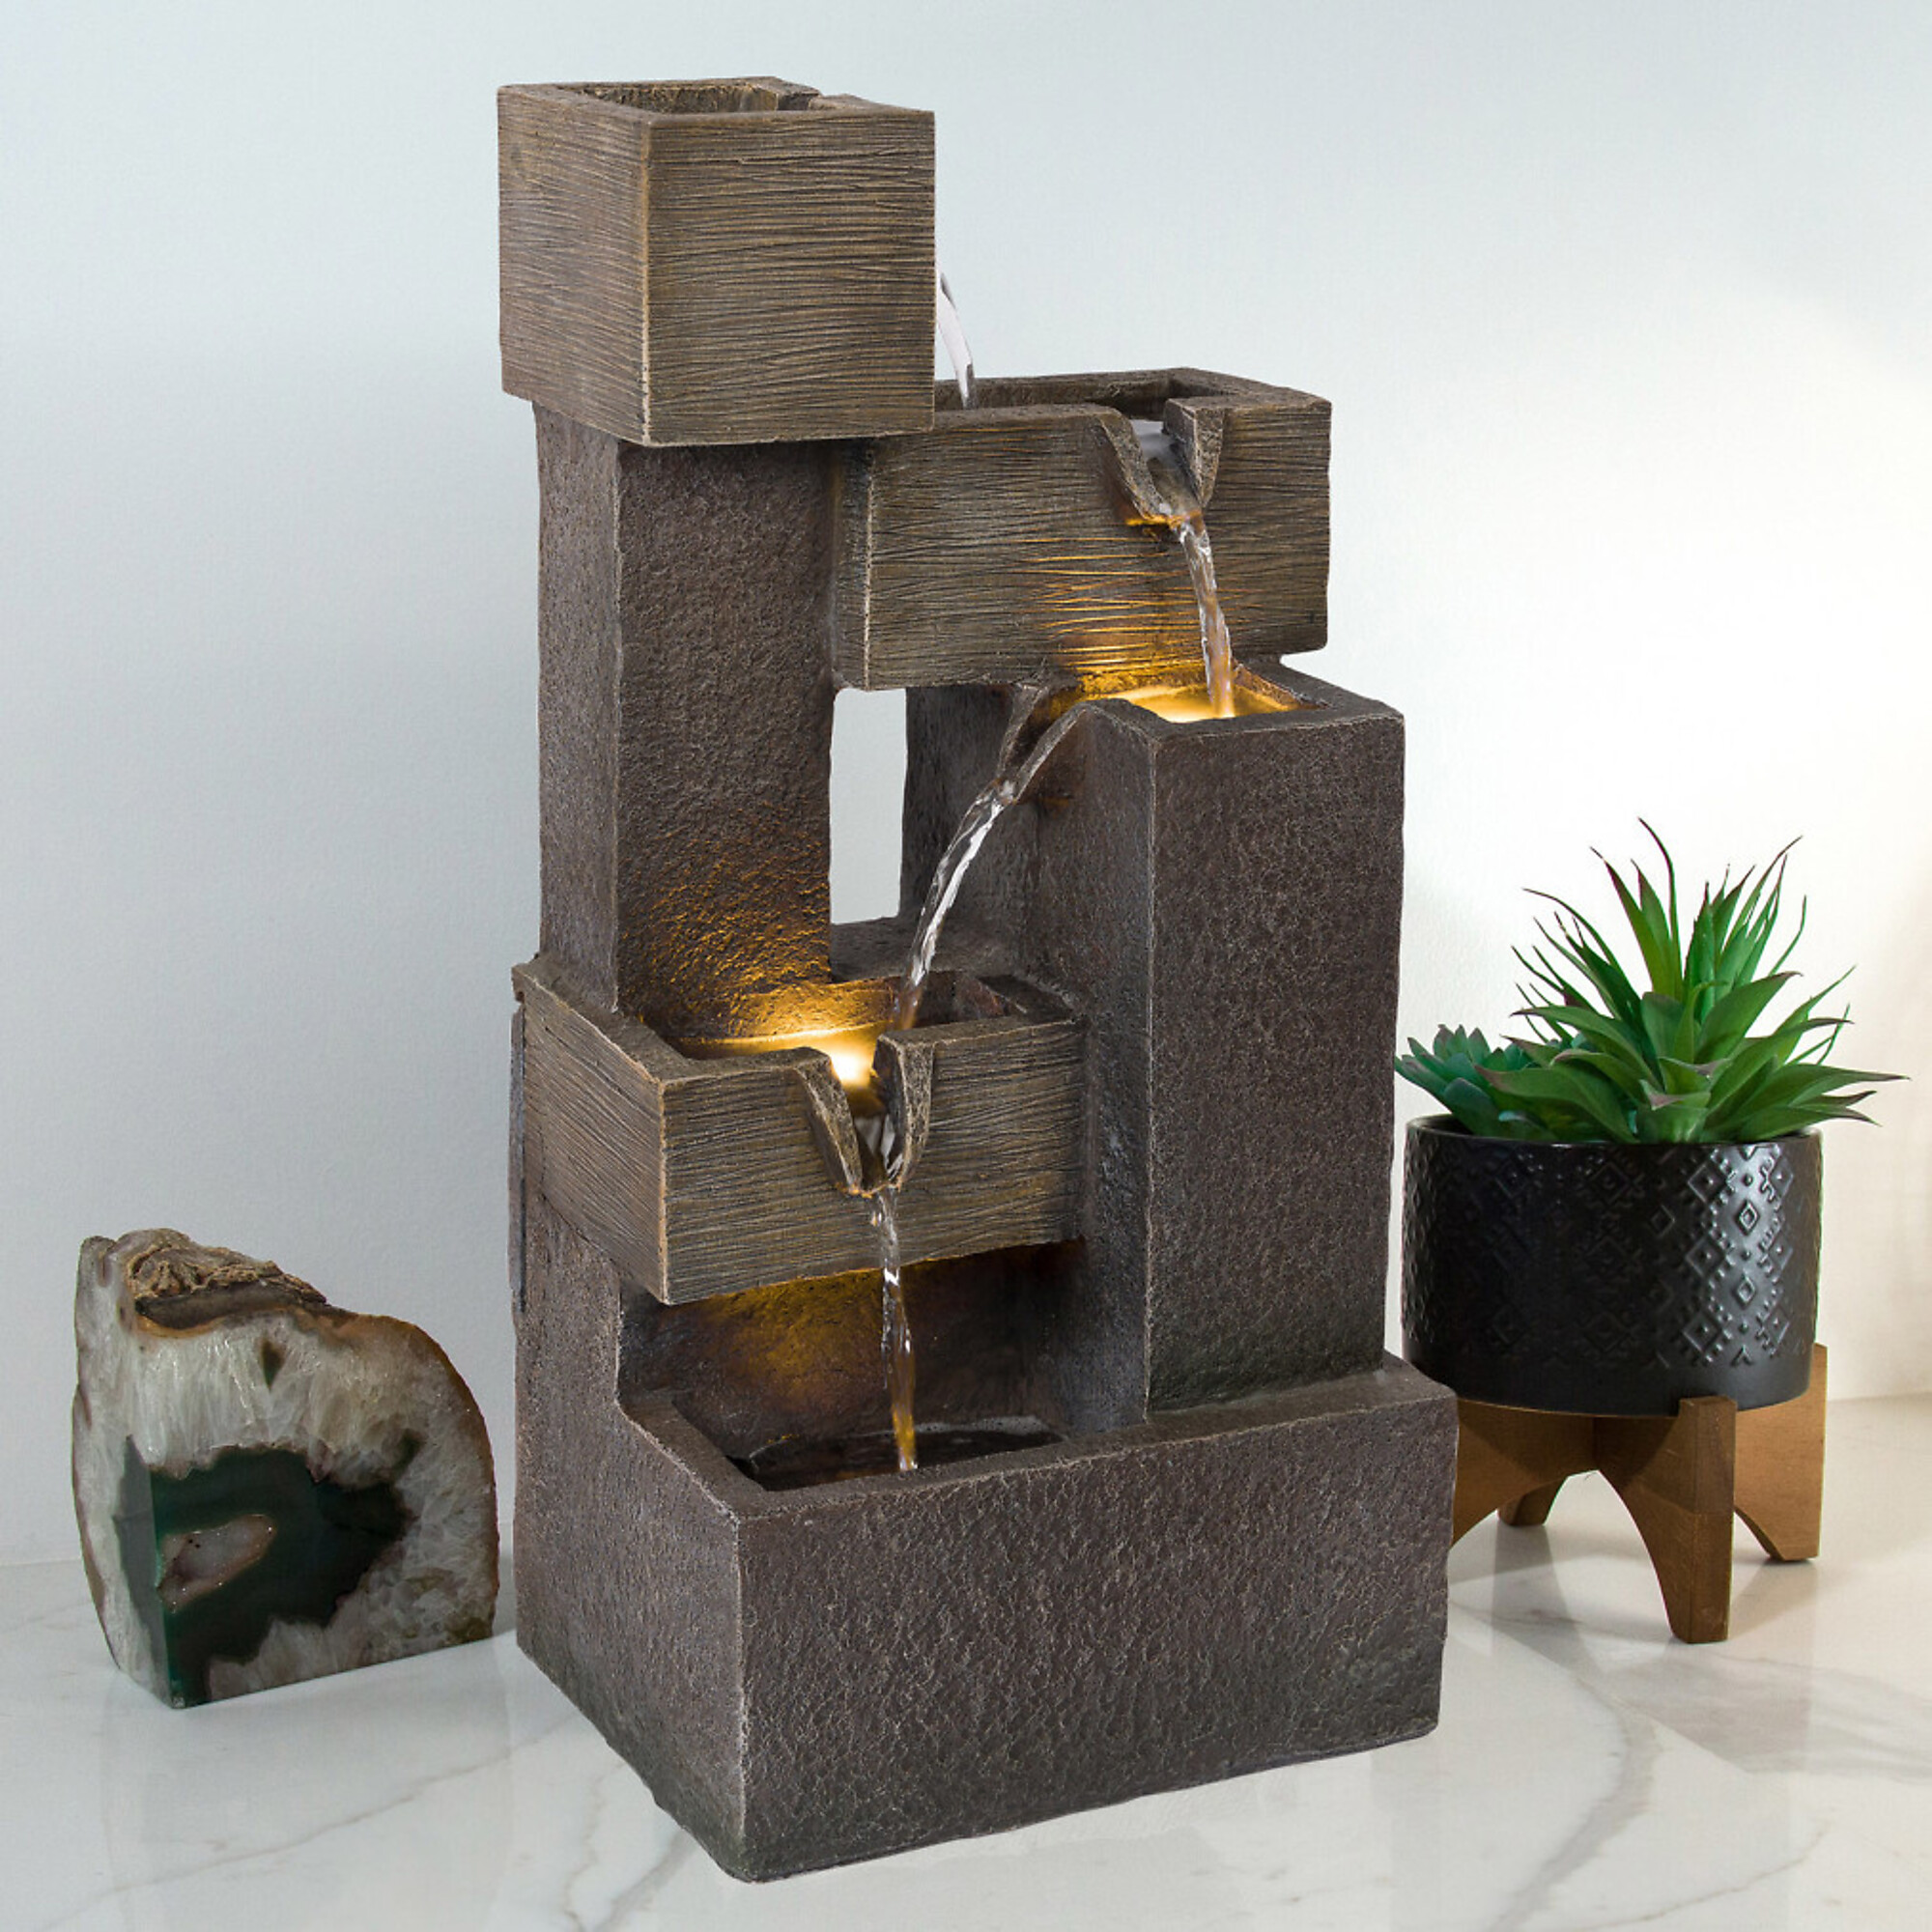 Alpine Corporation, Cascading Fountain w/ Warm White LED Lights 5-Tier, Volts 120 Power Cord Length 6 ft, Model ZDQ110